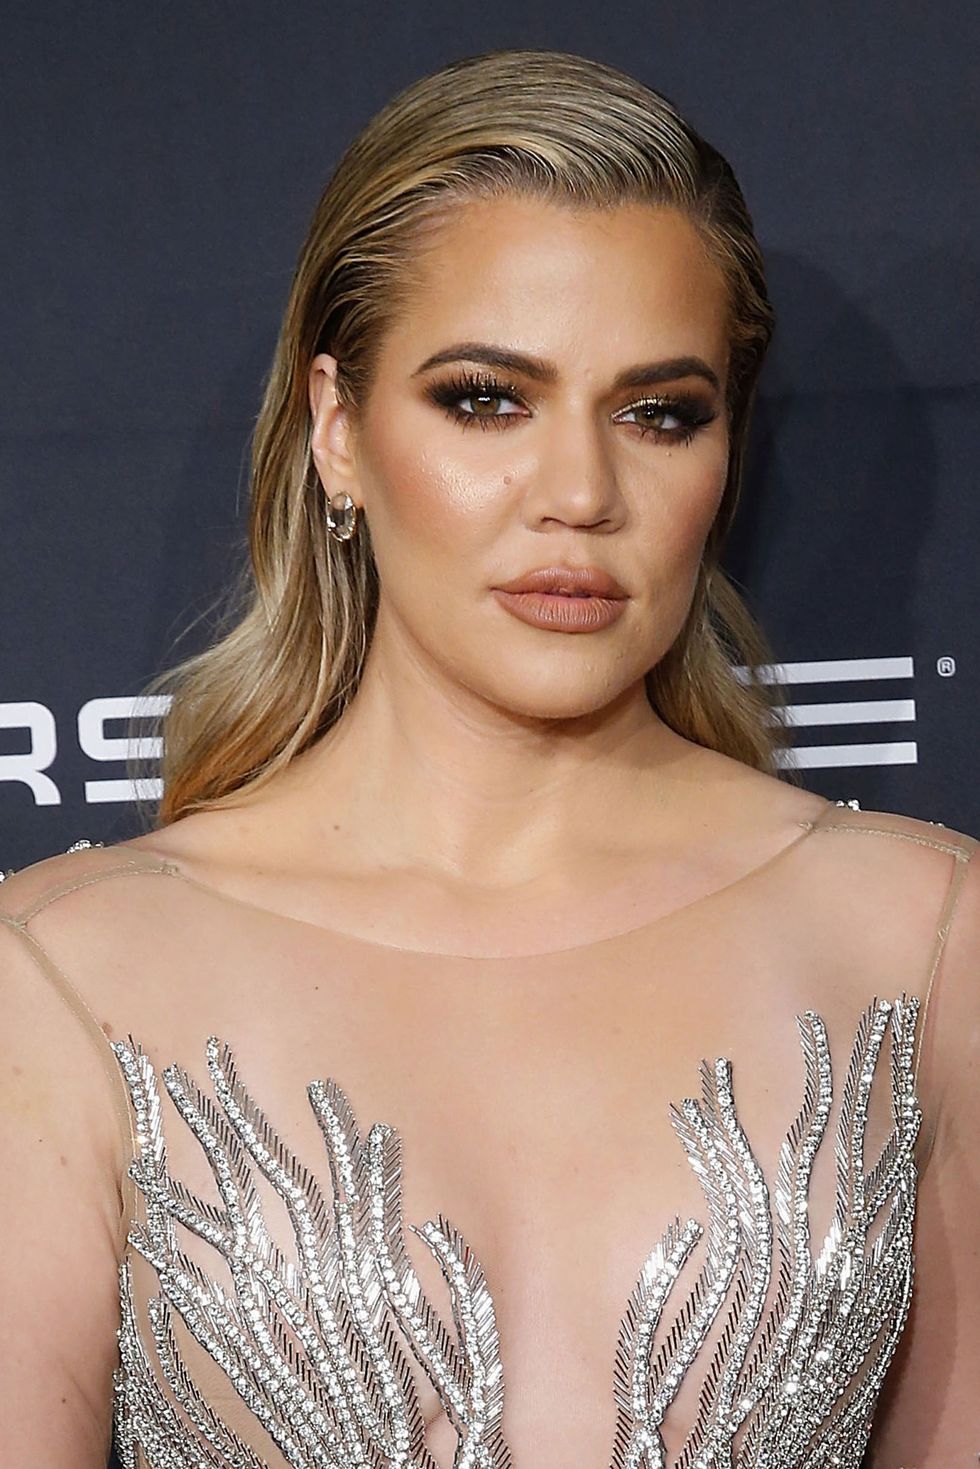 <p>Khloé Kardashian<span class="redactor-invisible-space" data-verified="redactor" data-redactor-tag="span" data-redactor-class="redactor-invisible-space"> once</span> sang the praises of joining the mile-high club — regardless of whether you are in a tiny private aircraft with&nbsp;other passengers very nearby who are able to see and/or hear you getting your "wings."</p><p>"Doing it on a private <a href="http://www.redbookmag.com/life/a44821/selma-blair-forcibly-removed-plane-shouting-he-burns-my-private-parts/" target="_blank" data-tracking-id="recirc-text-link">plane</a> is great, especially when there are other passengers on board," she <a href="http://perezhilton.com/2016-01-25-khloe-kardashian-dishes-about-wild-sex-on-app/?from=post#.WOUIWpMrJAY" target="_blank" data-tracking-id="recirc-text-link">said</a>. "It's part of the thrill! I walked into the bathroom first and then he followed so it wasn't exactly stealth! Everyone obviously knew what was going on in and when I walked out, they asked if we had fun!"</p><p>#Awkward. Or hey, whatever gets you going...<span class="redactor-invisible-space" data-verified="redactor" data-redactor-tag="span" data-redactor-class="redactor-invisible-space"></span><br></p><p><strong data-redactor-tag="strong">RELATED: </strong><a href="http://www.redbookmag.com/love-sex/sex/a48489/sex-tips-from-sex-workers/"></a><strong data-redactor-tag="strong"><a href="http://www.redbookmag.com/love-sex/sex/a48489/sex-tips-from-sex-workers/" target="_blank" data-tracking-id="recirc-text-link">8 Very Necessary Sex Tips From Sex Workers</a></strong></p>